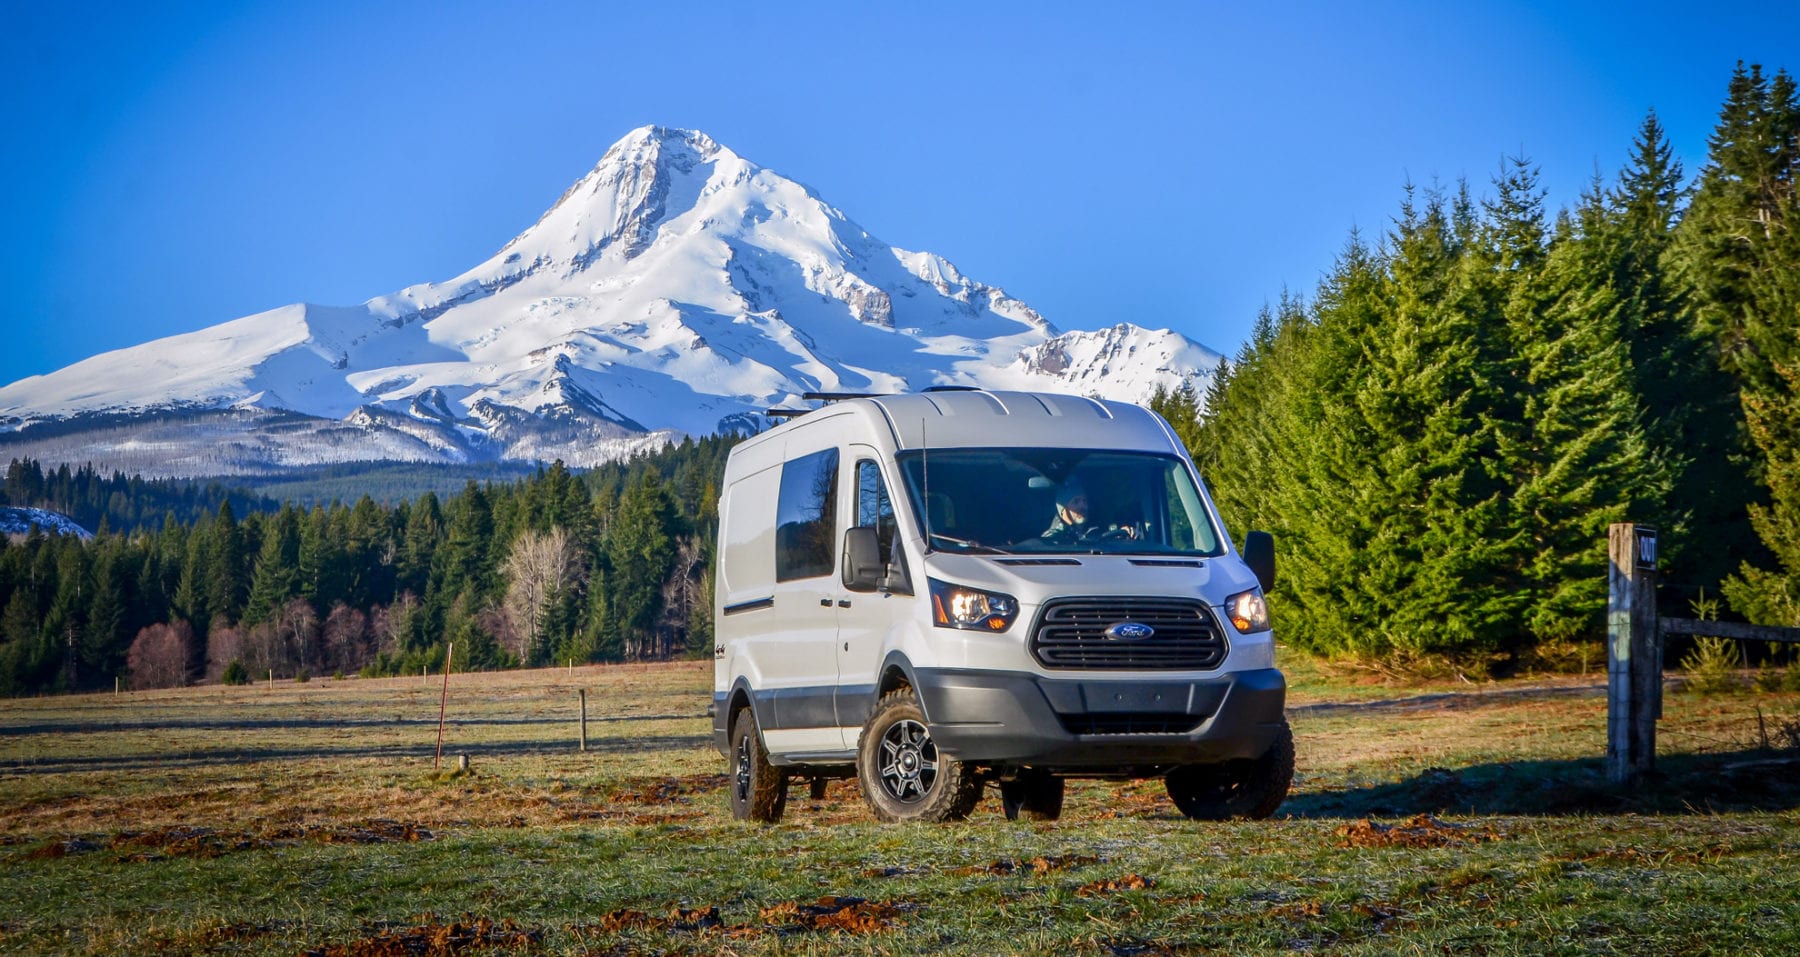 Introducing Axis Vehicle Outfitters - ROAMERICA